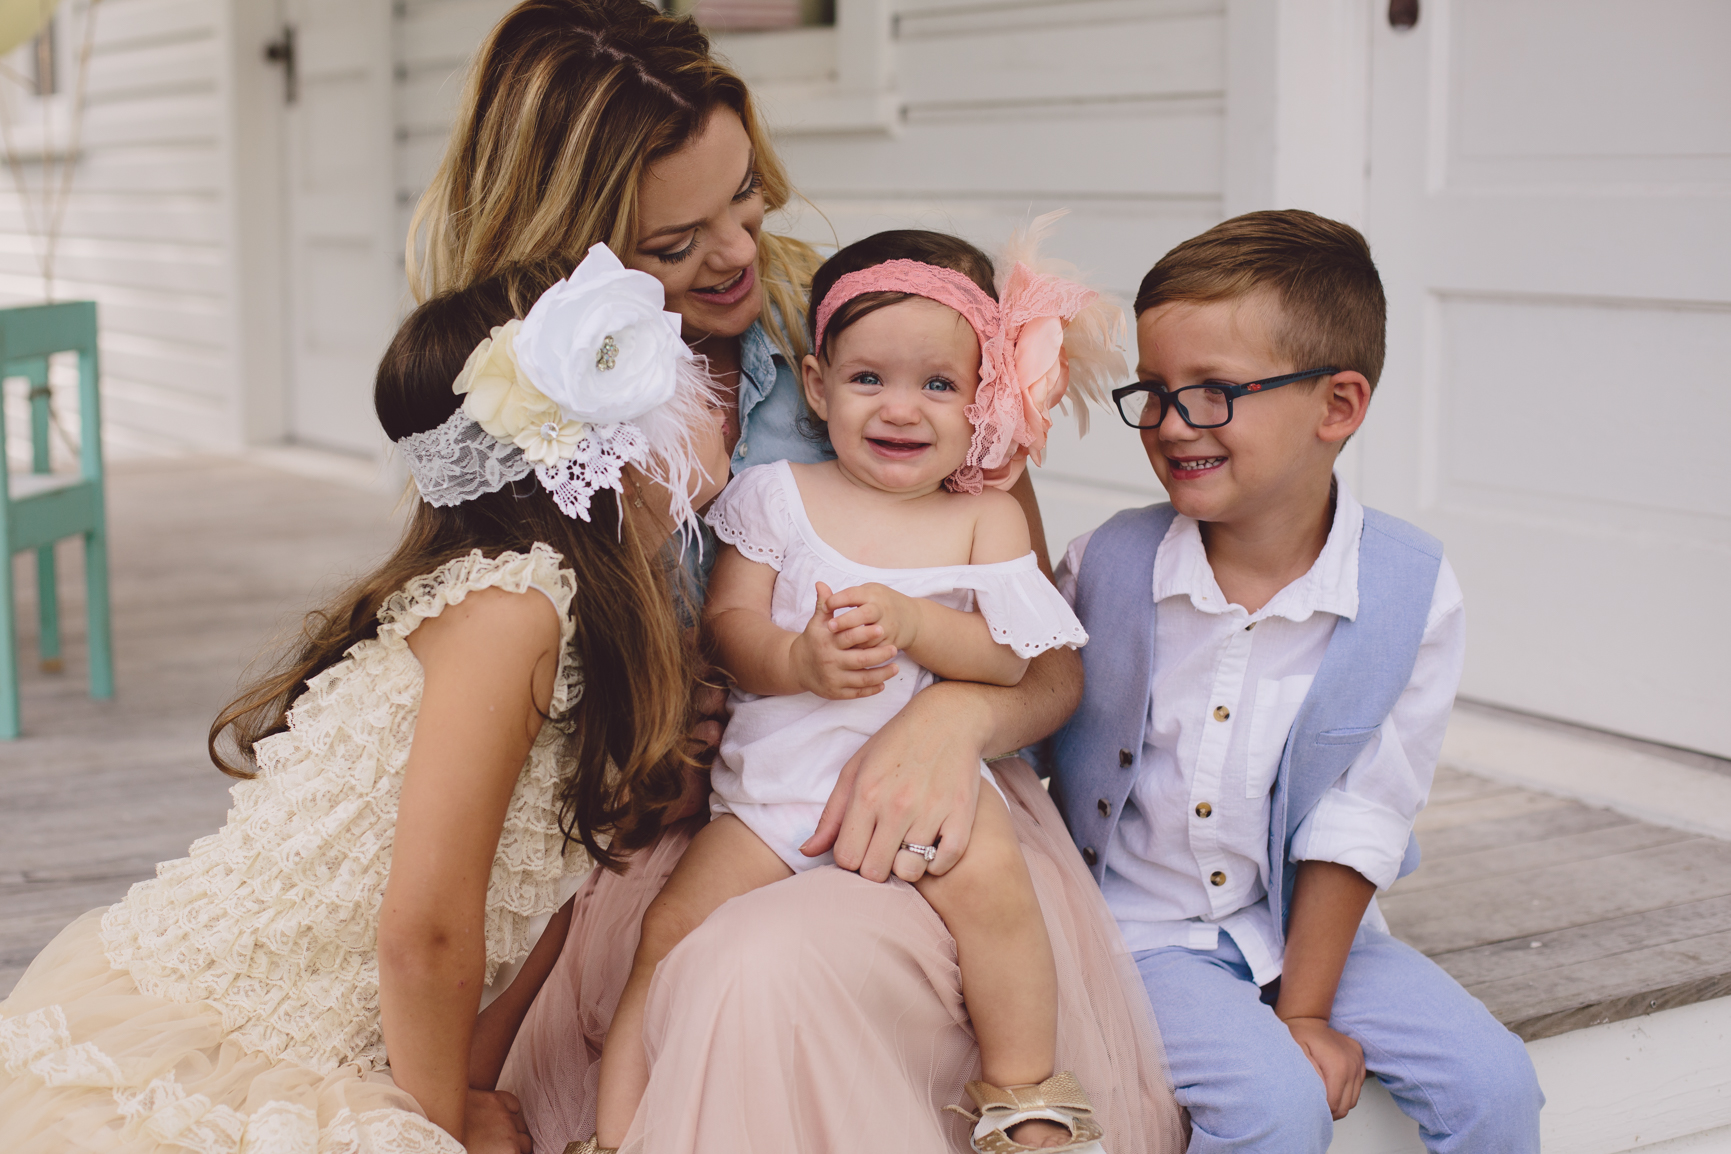 and then there were 4! — Alyssa Shrock Photography